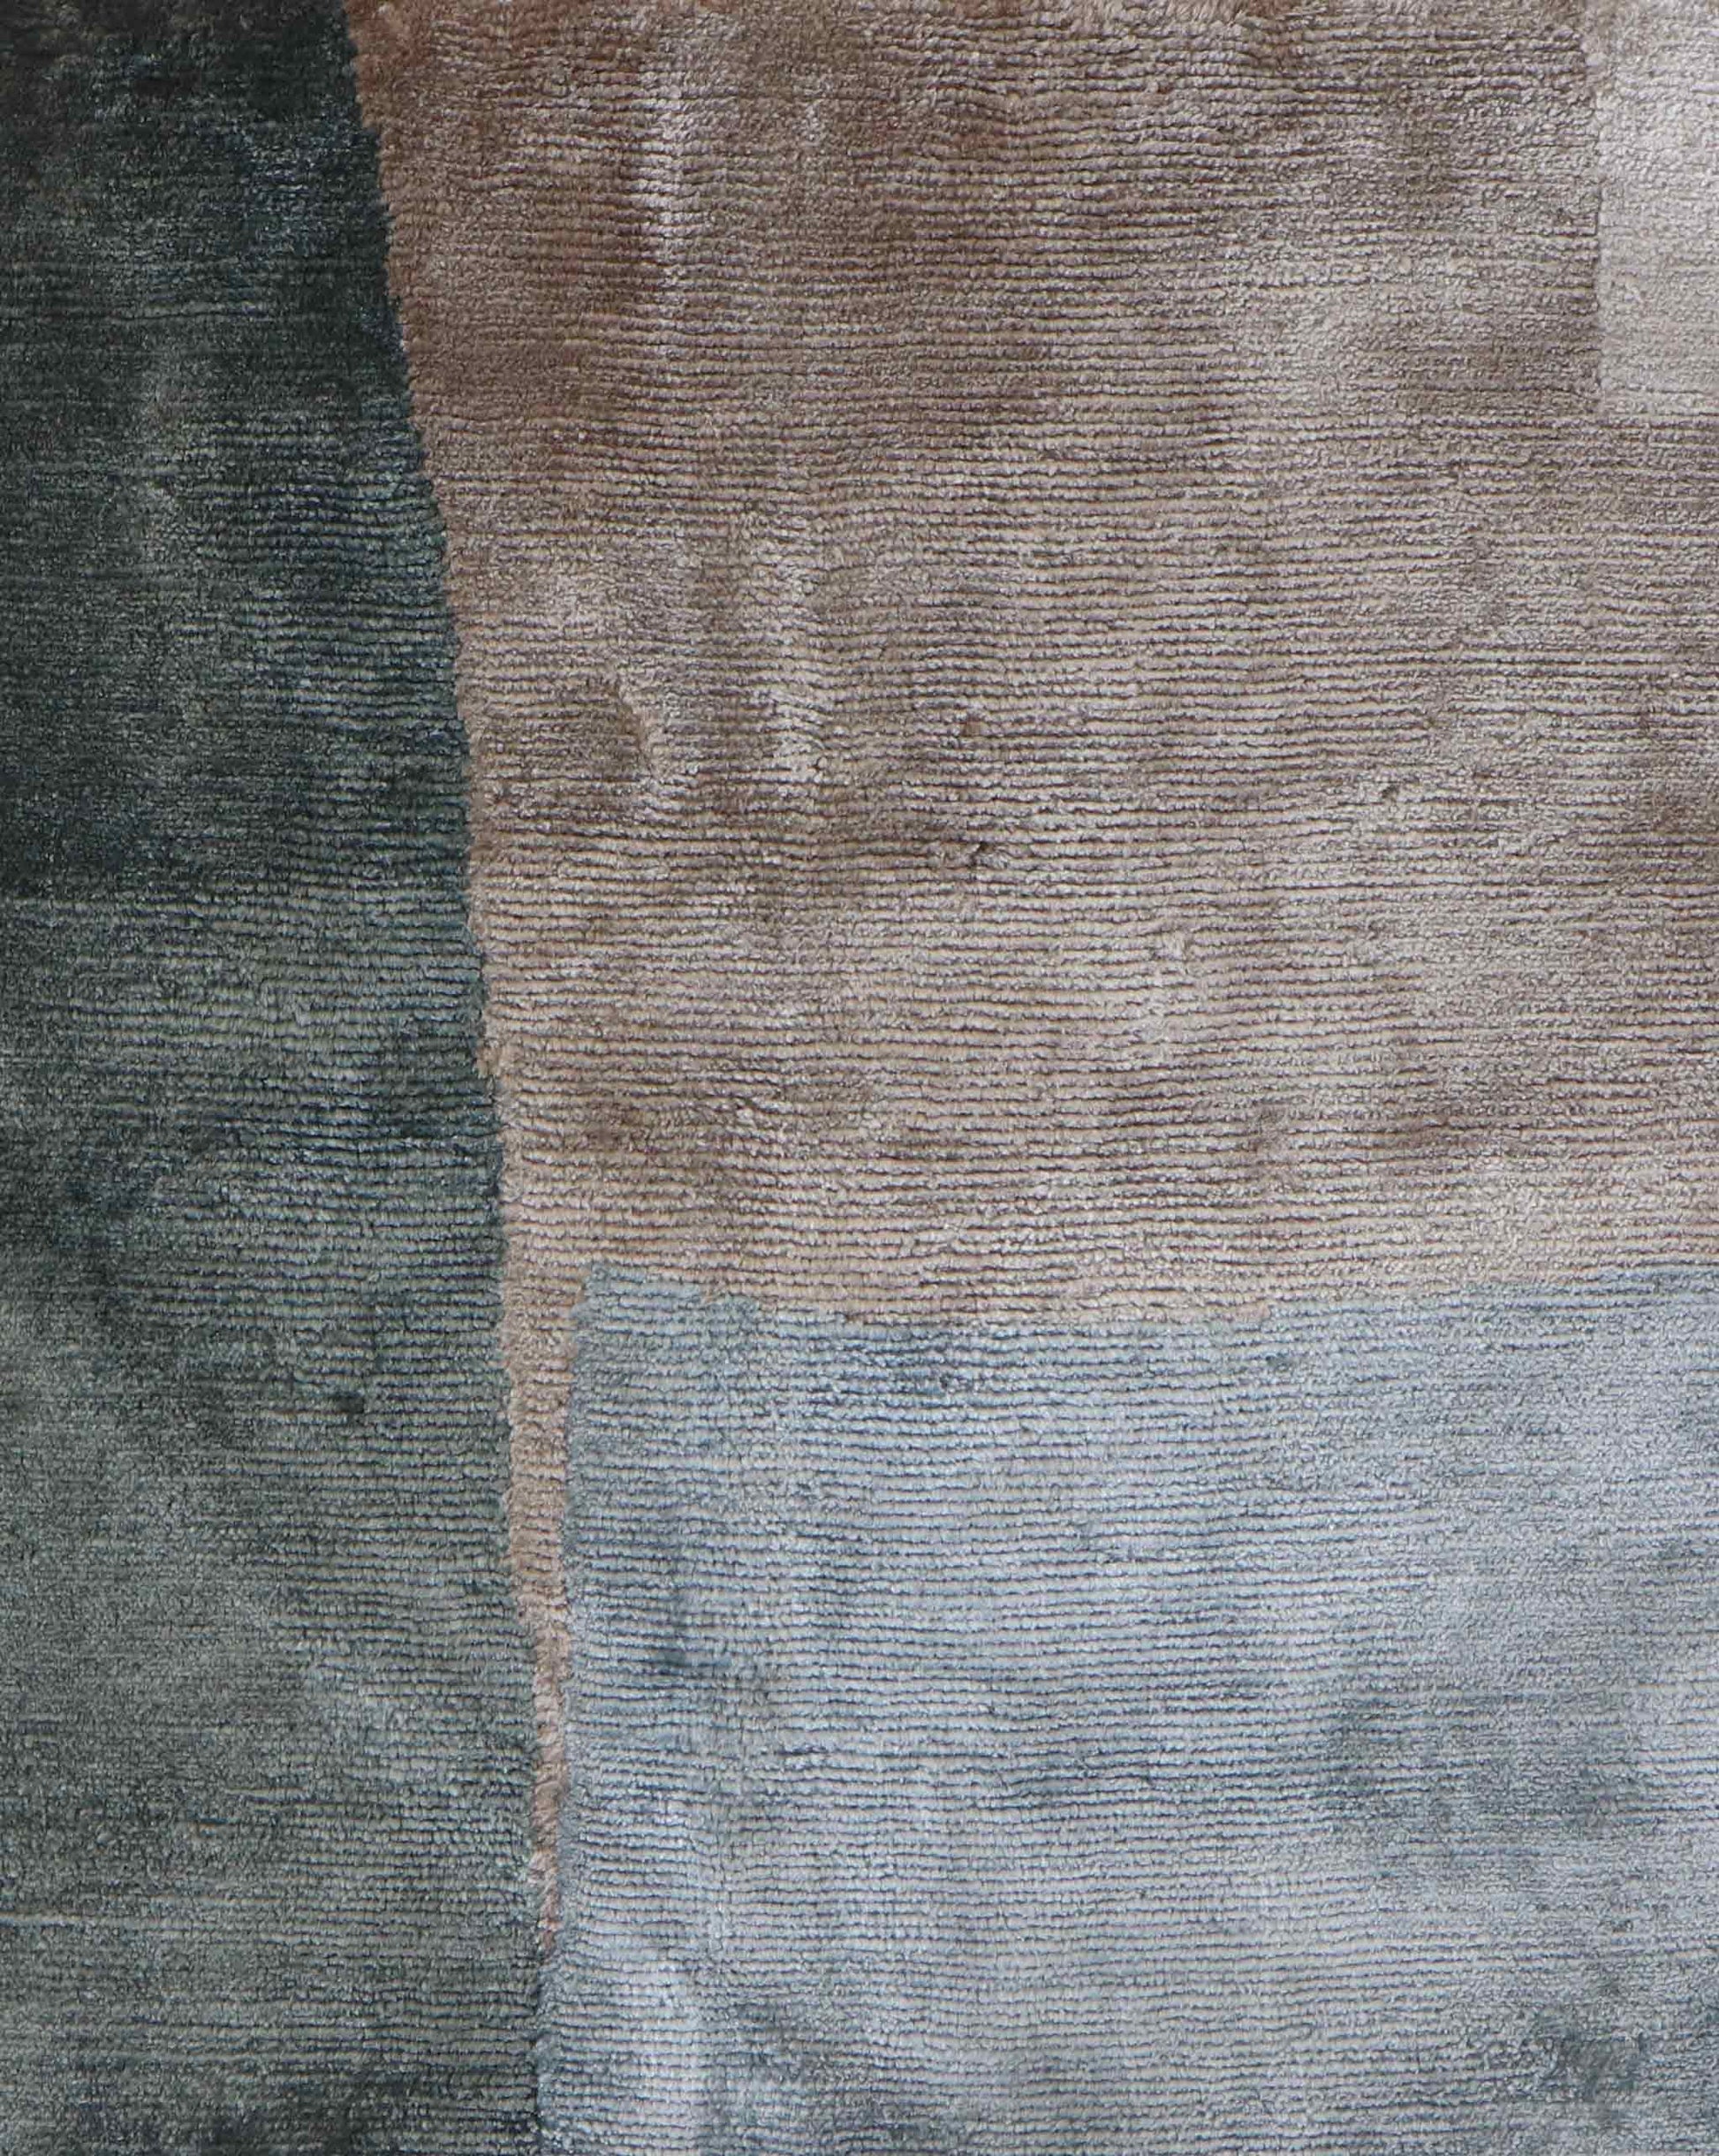 A close up image of the Blocked rug in Land.